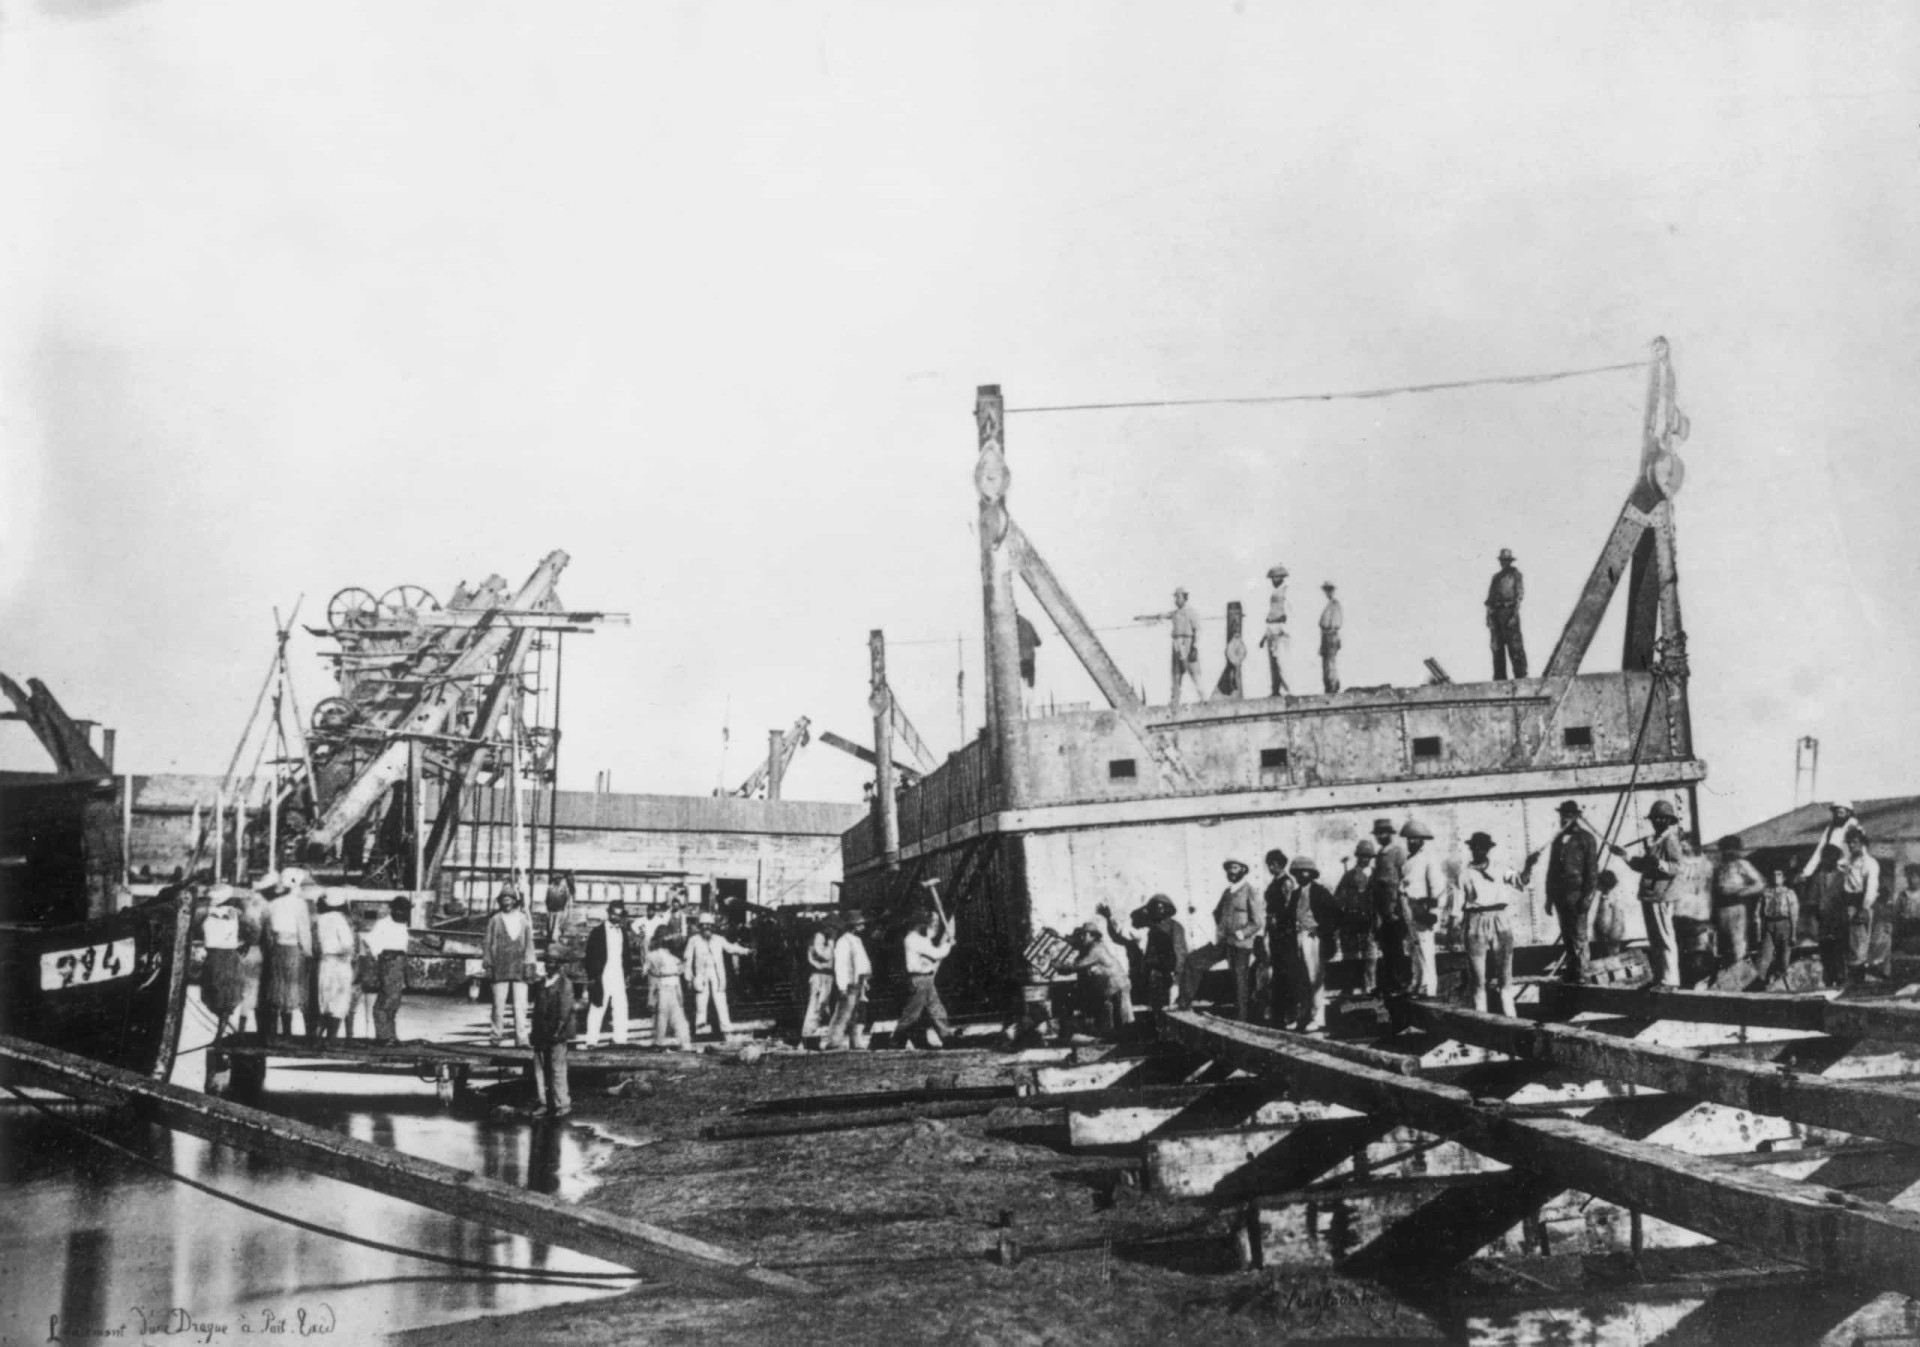 <p>The dredgers and excavators in operation during the construction of the canal provided the project the boost it needed. The machinery consisted of channel-dredgers, where heavy buckets scraped away sand and clay and emptied the waste material into a metal gutter to be deposited on to the bank.</p>